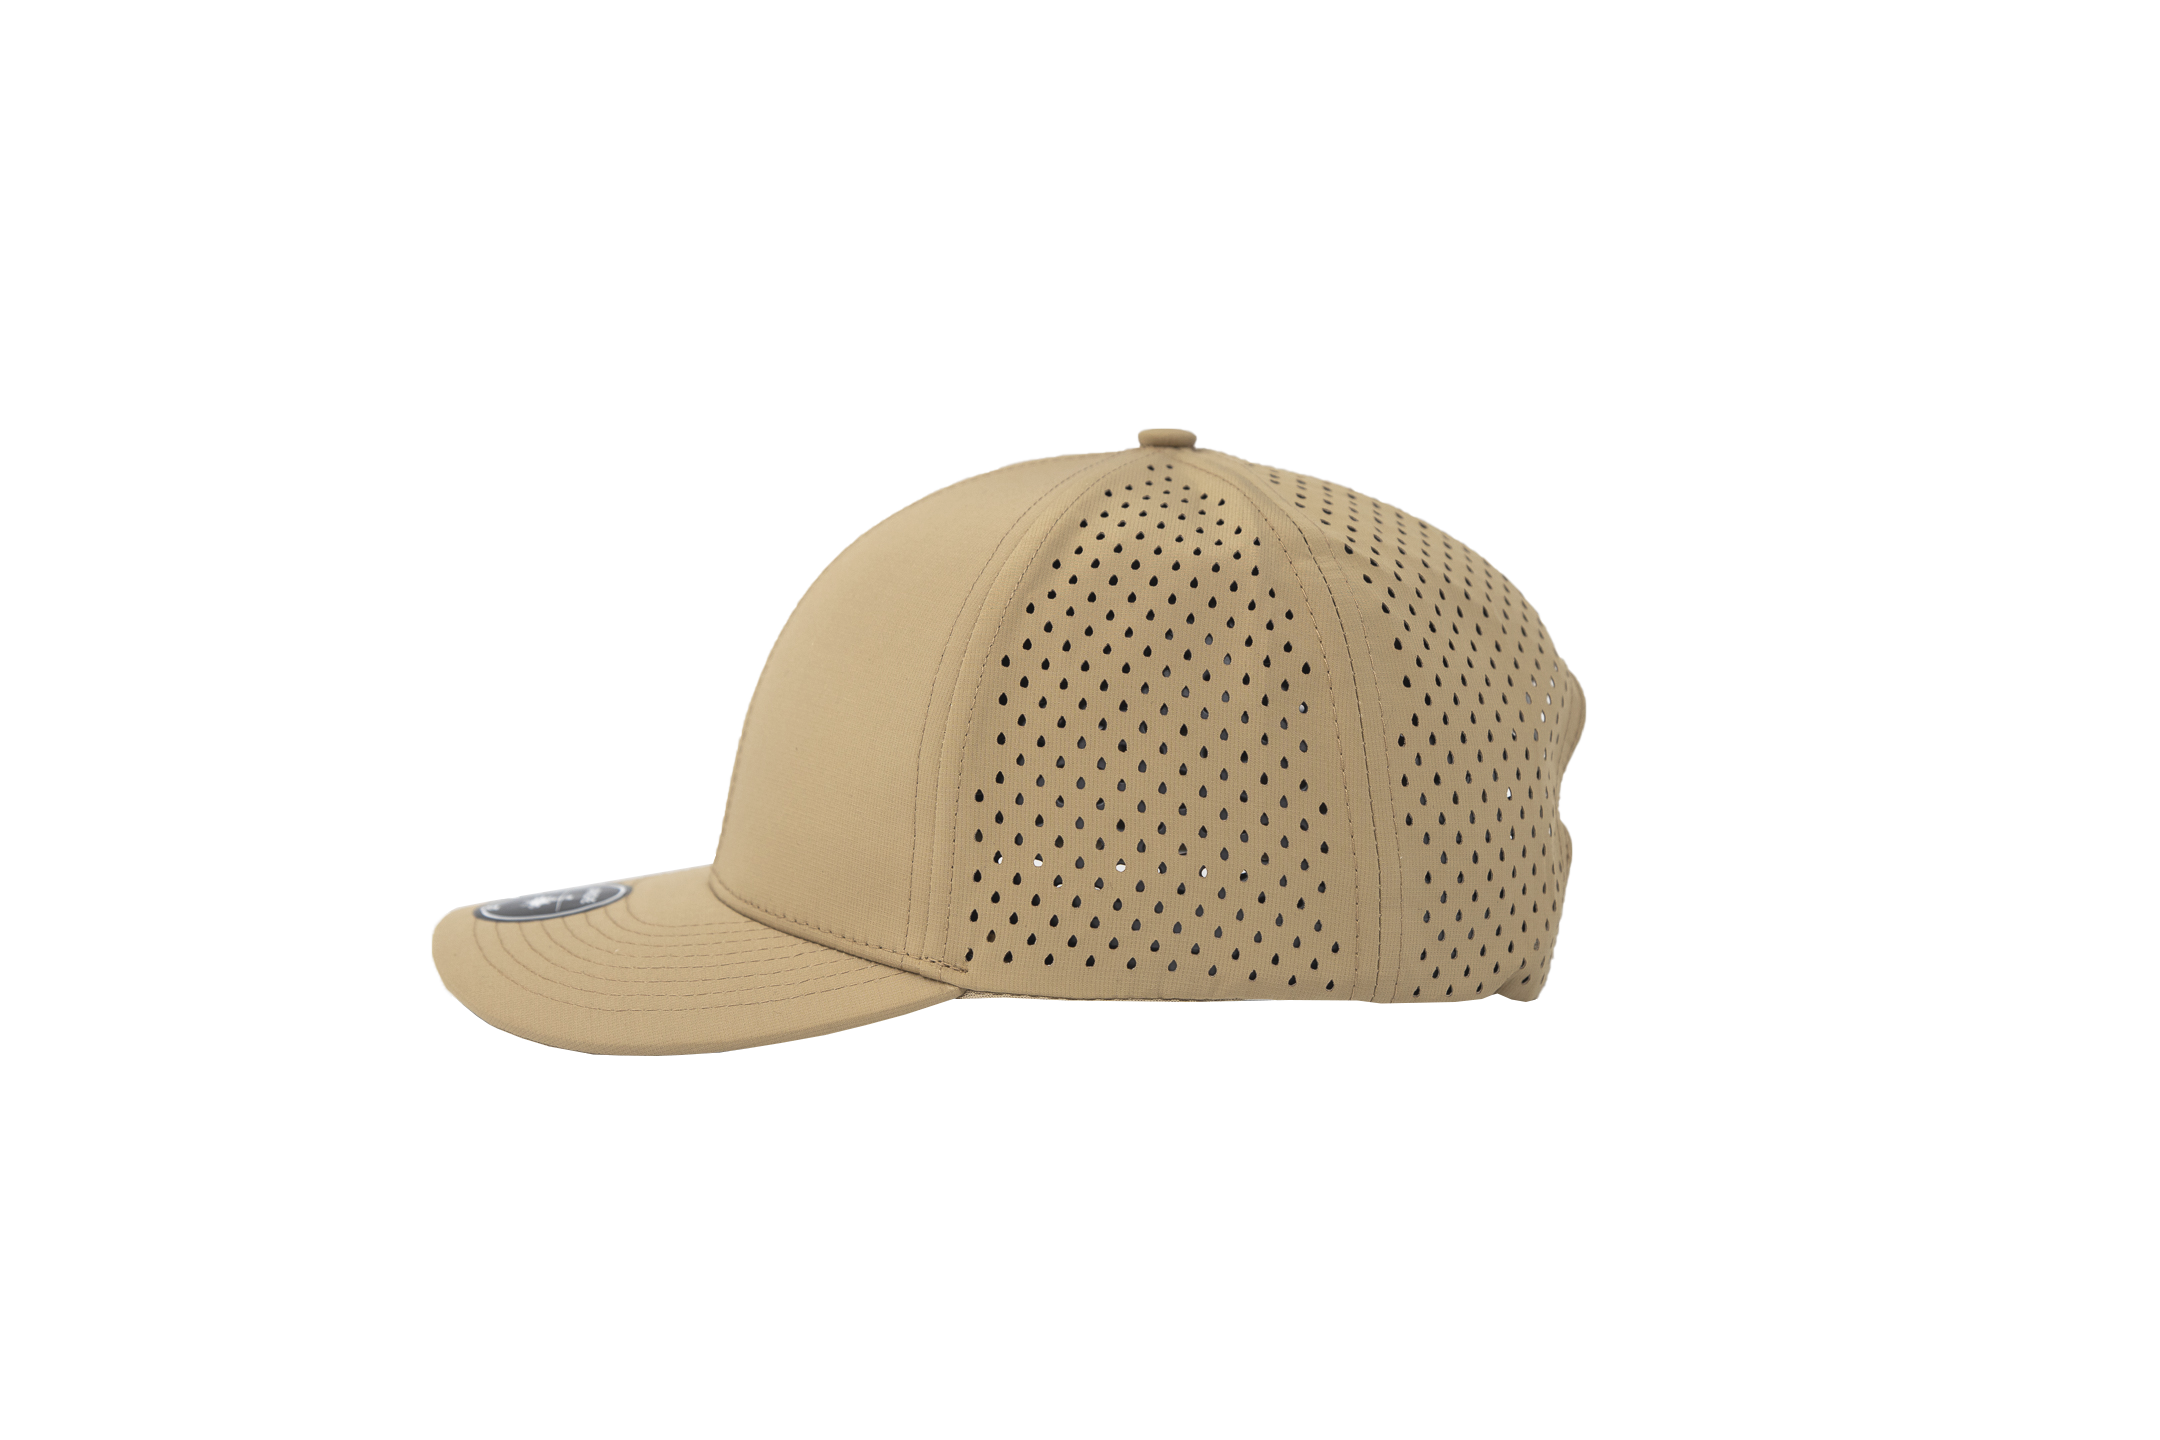 khaki apache side view perforated hat